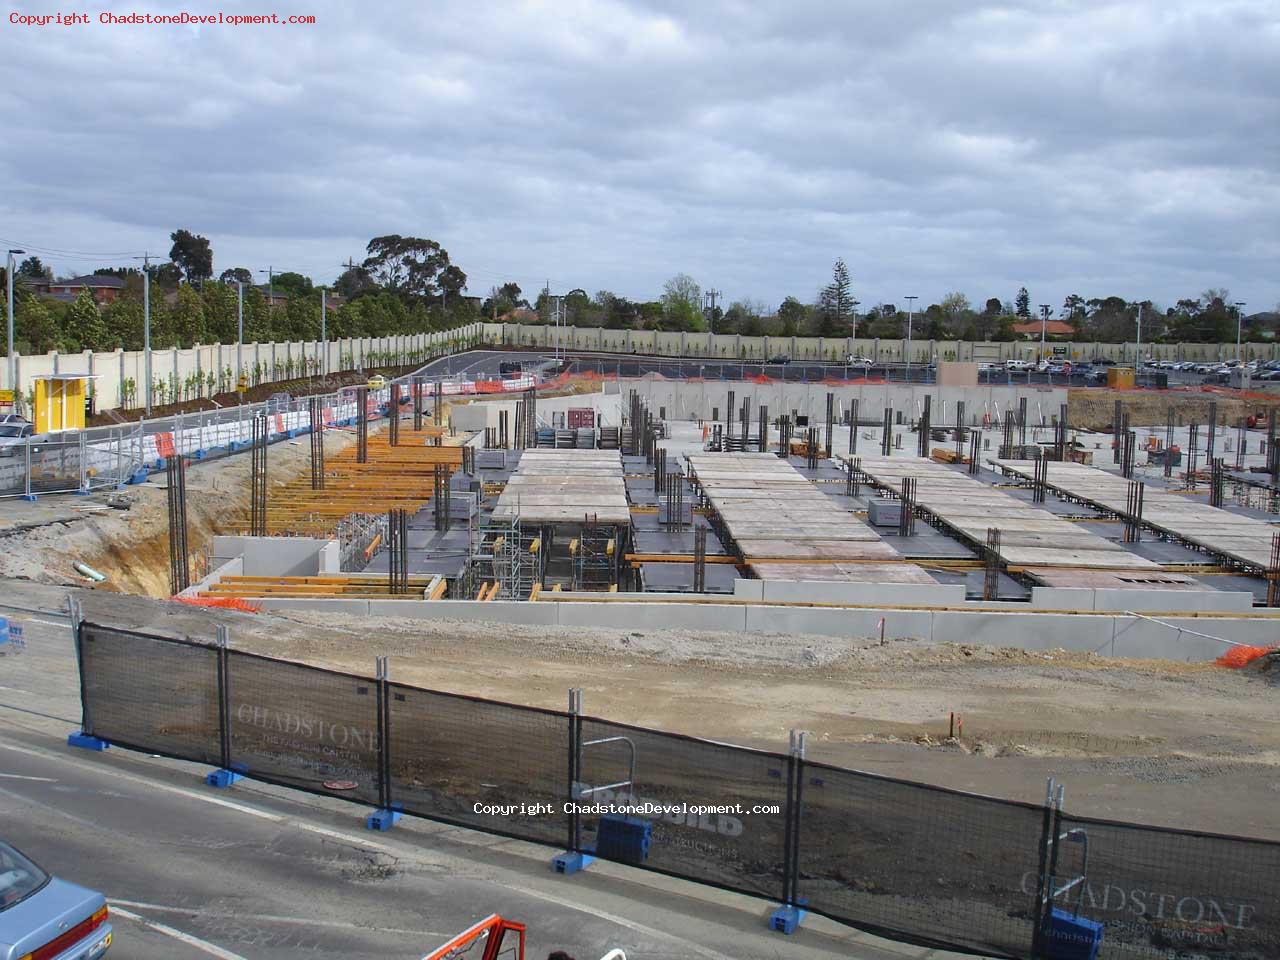 New multilevel carpark - preparing for puring of concrete on 1st level - Chadstone Development Discussions Gallery